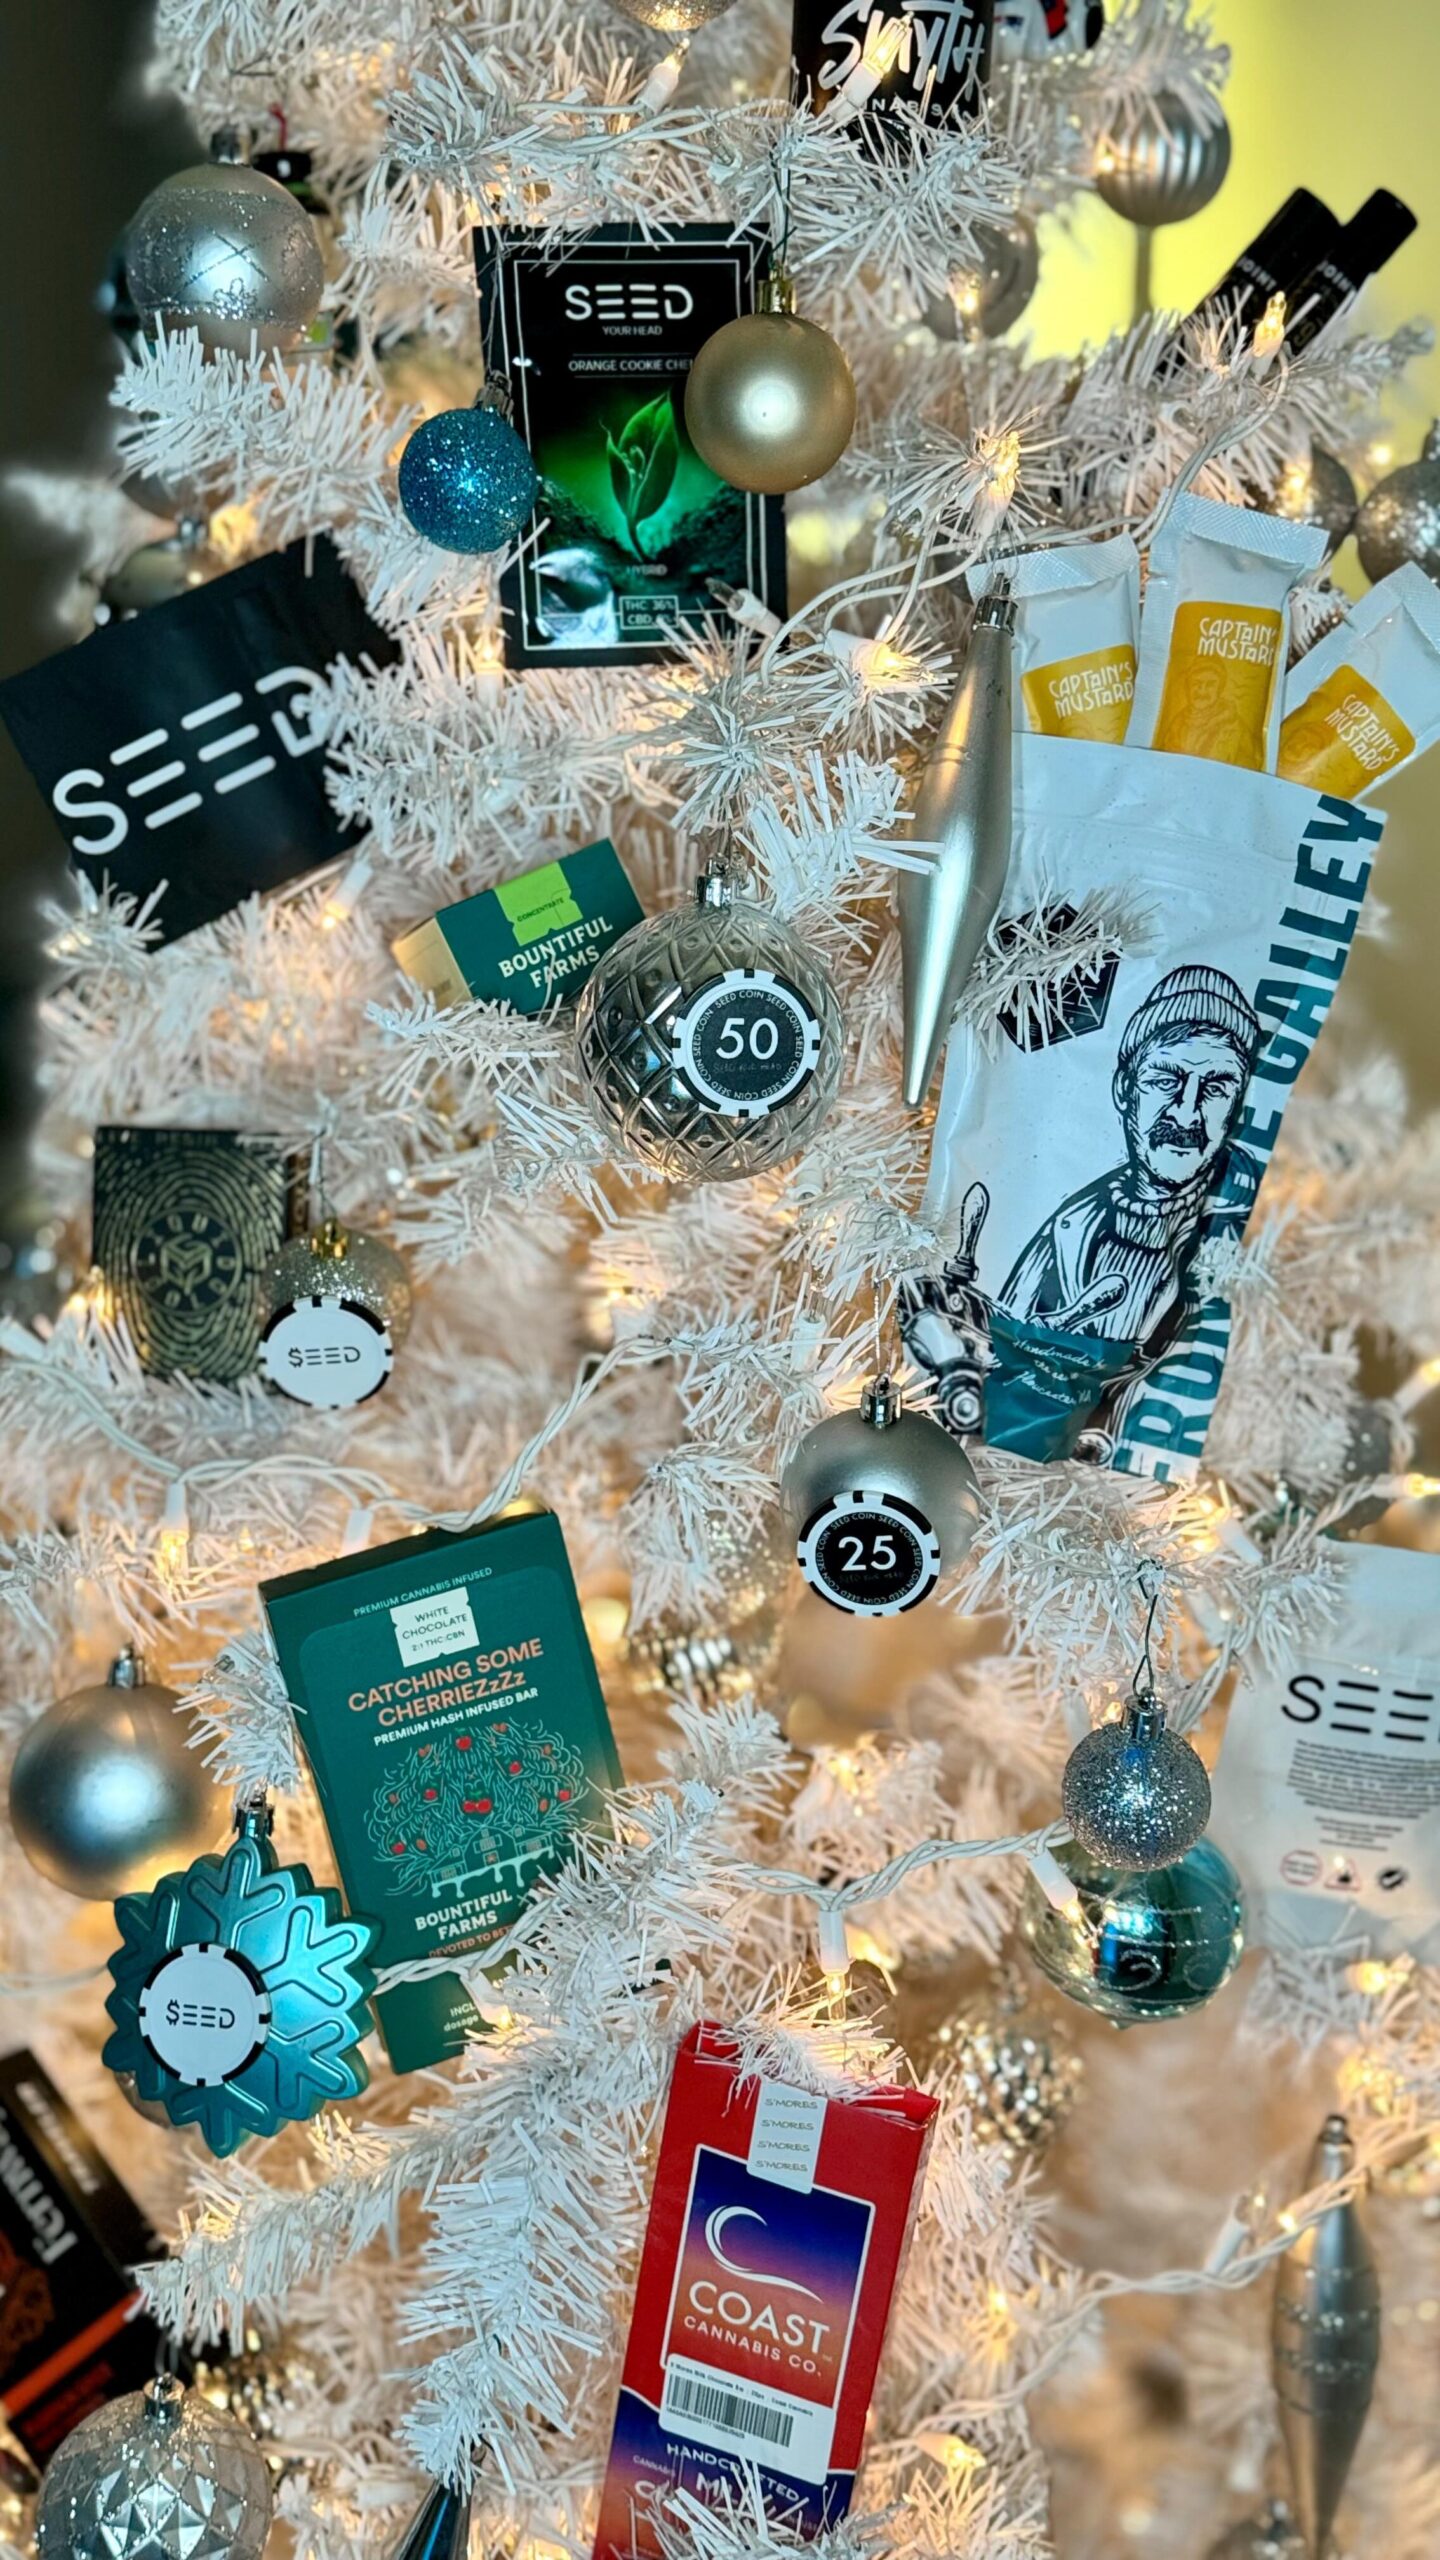 Looking for stocking stuffers?How about a SEED COIN so they can get …
Our Premium SEED Flower,
from @coastcannaco
from @smythcannabisco
Prerolls from @no9collection
Live Rosin from @bountifulfarms
Ketchup and Mustard packets from @oceanbreezecultivators
Live Resin Vape from @greengoldgroup
Pocket Vape from @fernway
and many many more!Let our elves guide you to the perfect gifts this season.